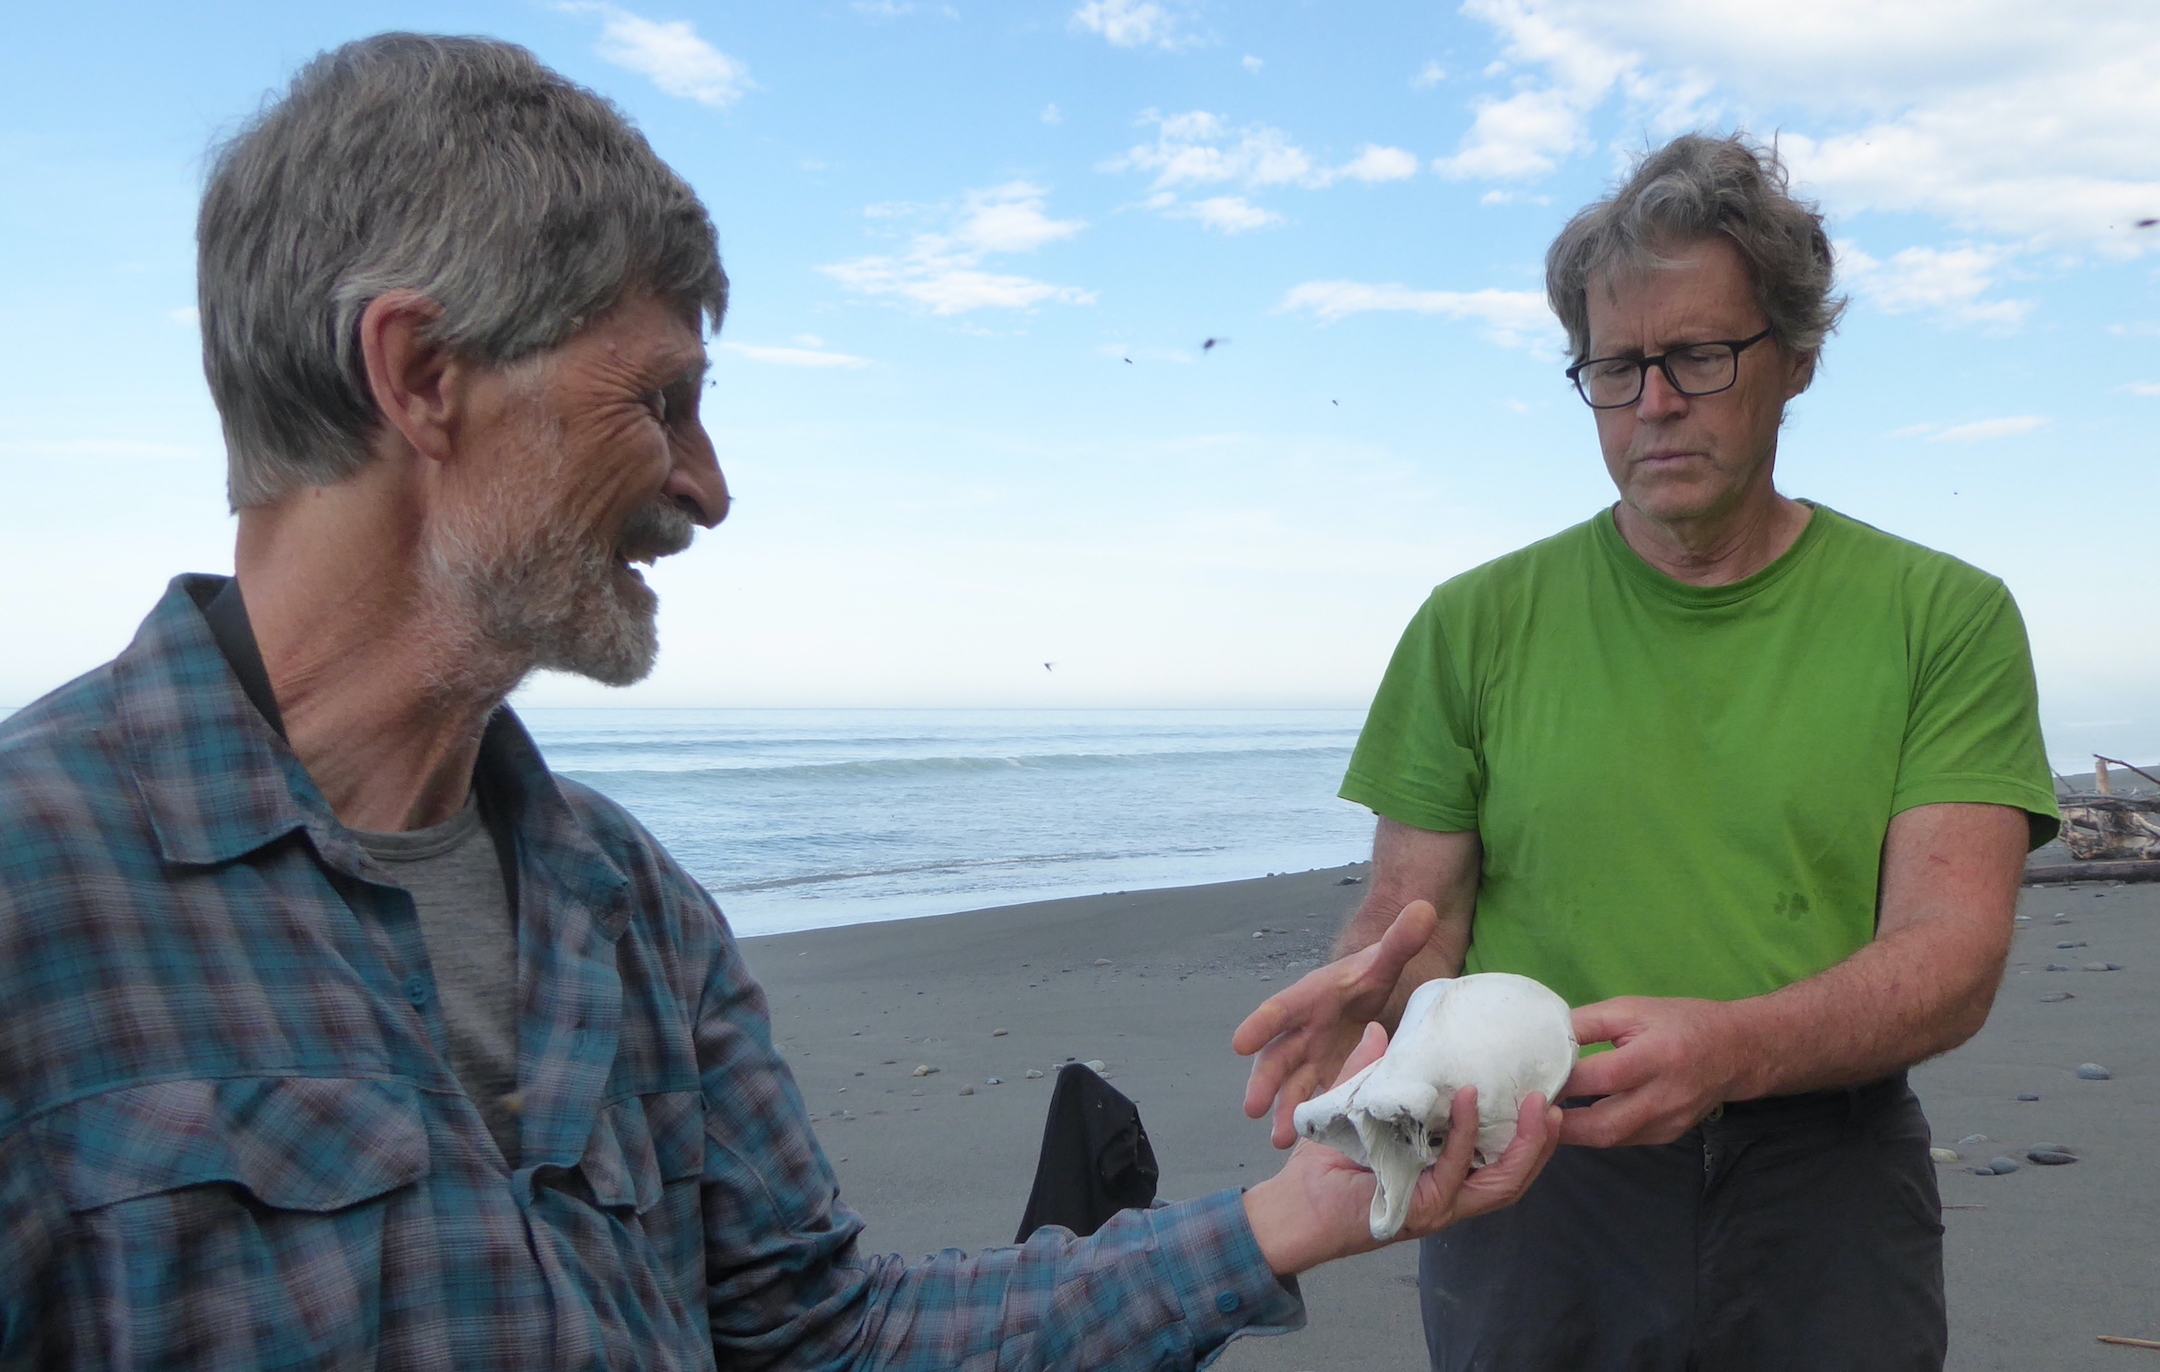 Two men look at a skull while standing on an ocean beach.